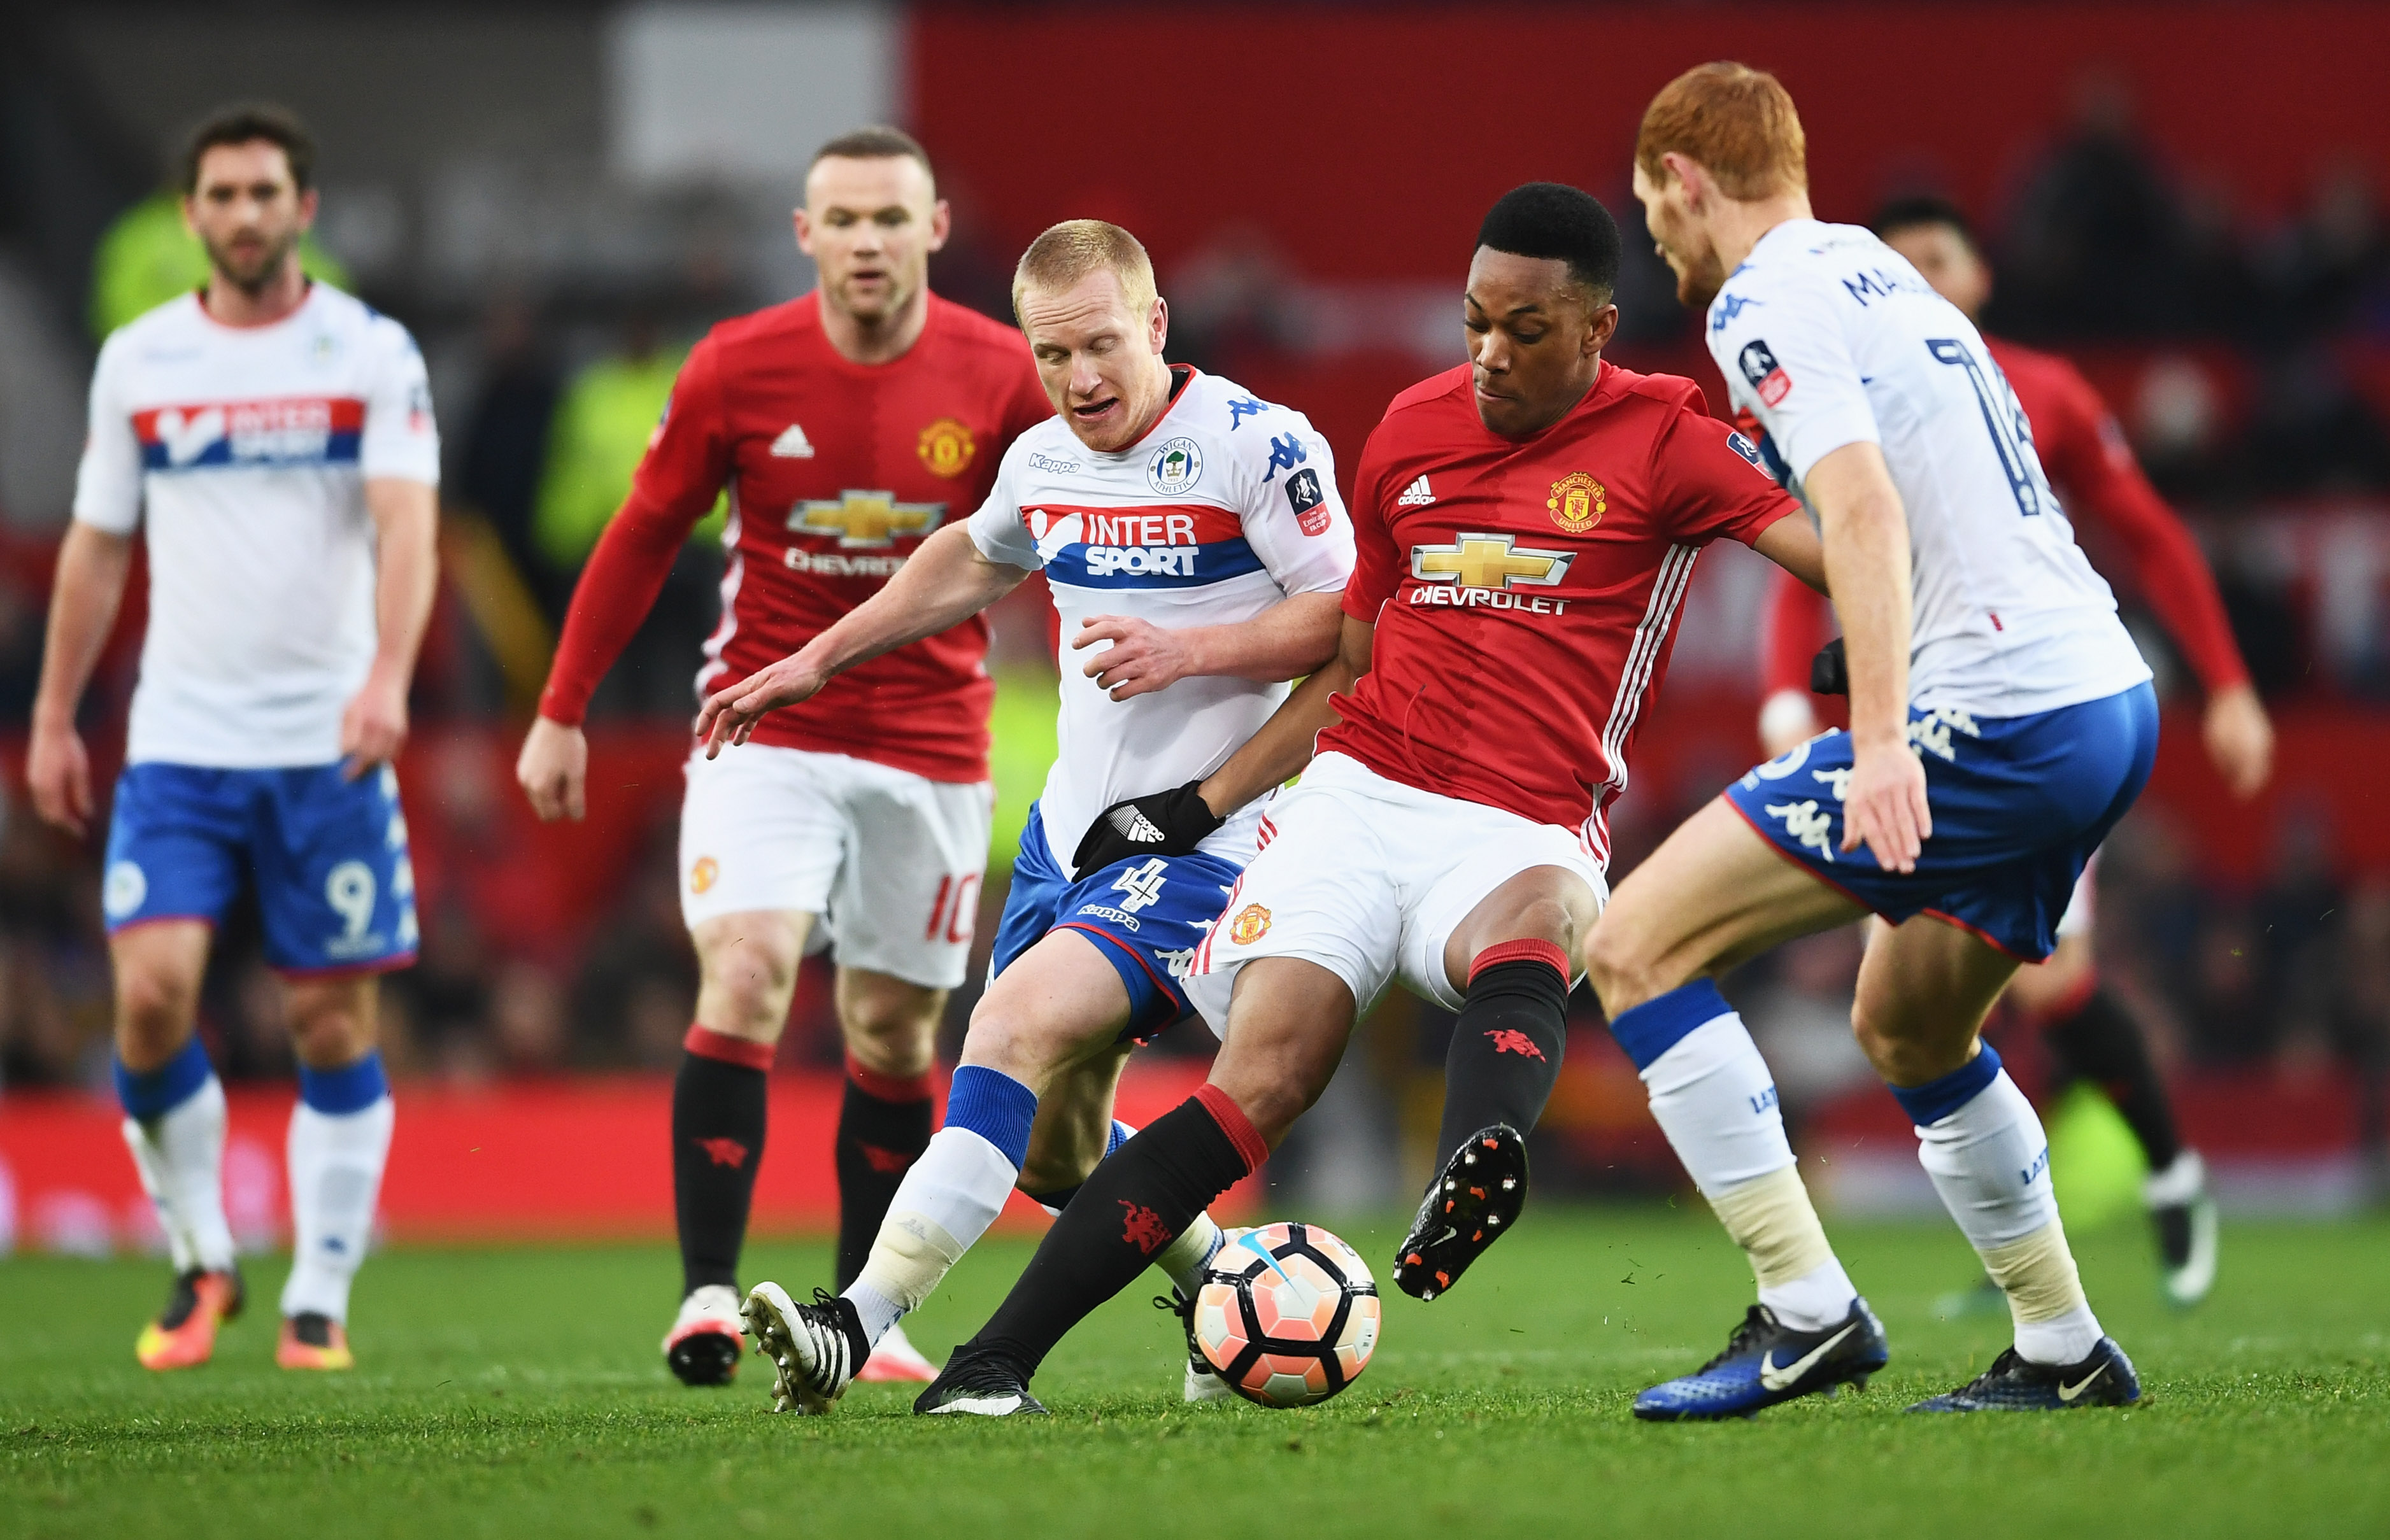 MANCHESTER, ENGLAND - JANUARY 29:  Anthony Martial of Manchester United battles with David Perkins and Shaun MacDonald of Wigan Athletic Anthony Martial of Manchester United during the Emirates FA Cup Fourth round match between Manchester United and Wigan Athletic at Old Trafford on January 29, 2017 in Manchester, England.  (Photo by Laurence Griffiths/Getty Images)